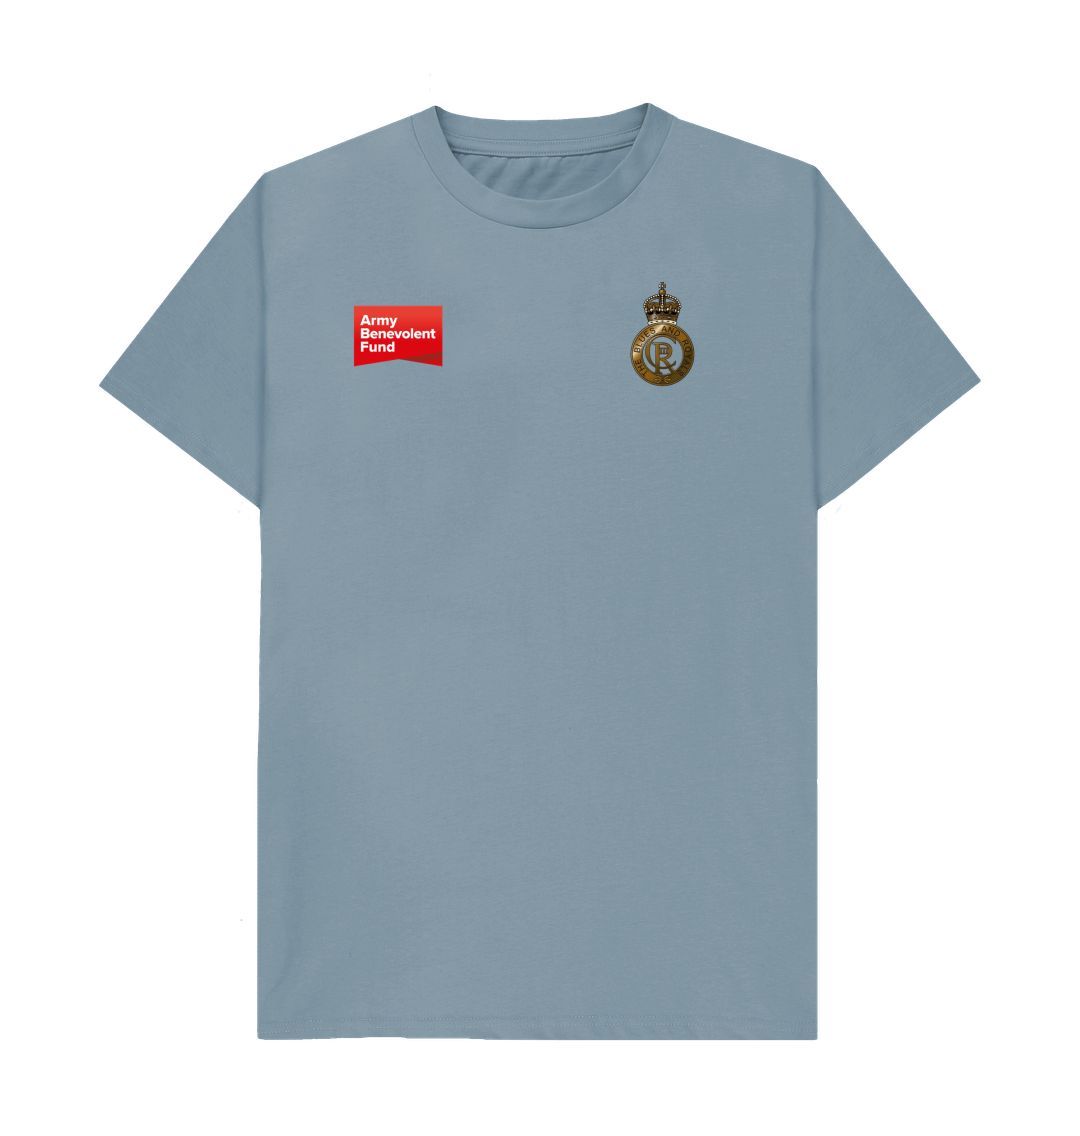 The Blues and Royals Unisex T-shirt - Army Benevolent Fund